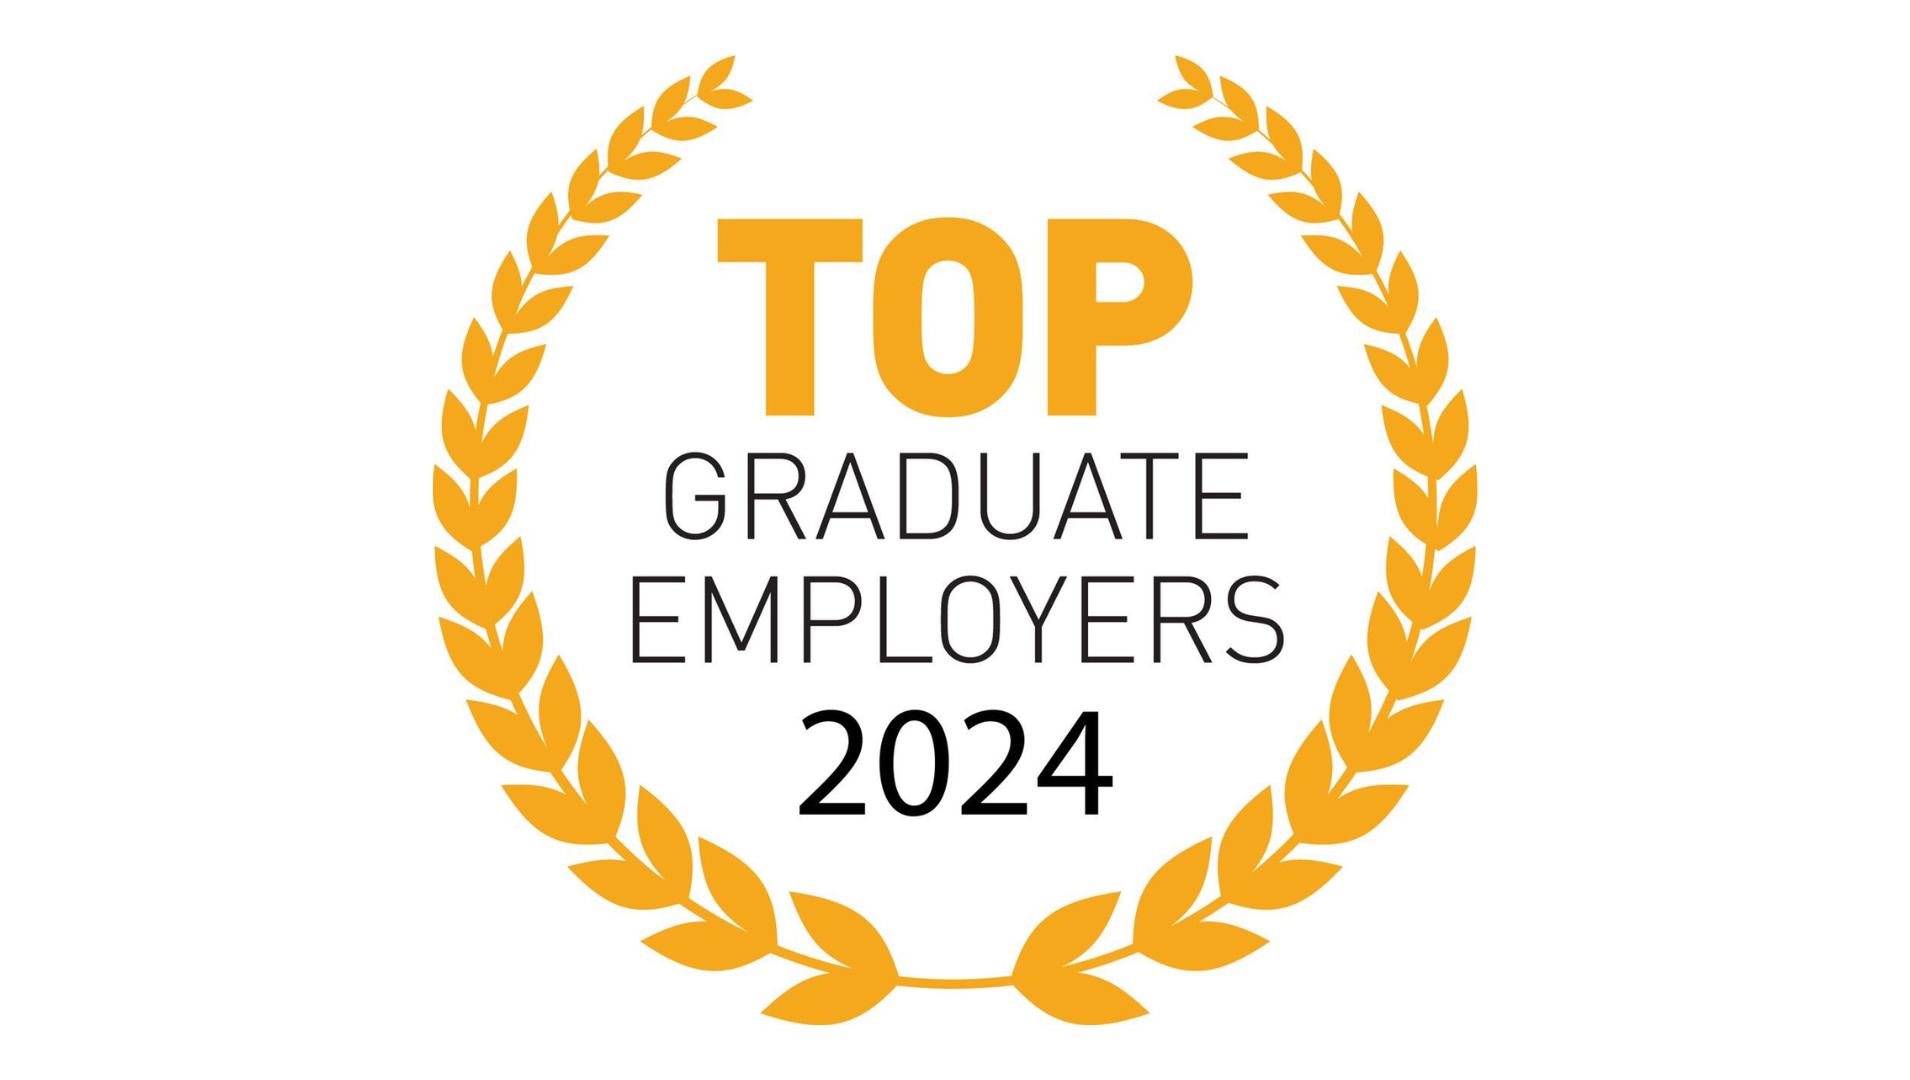 APM has been listed in the top employers for graduates in 2024